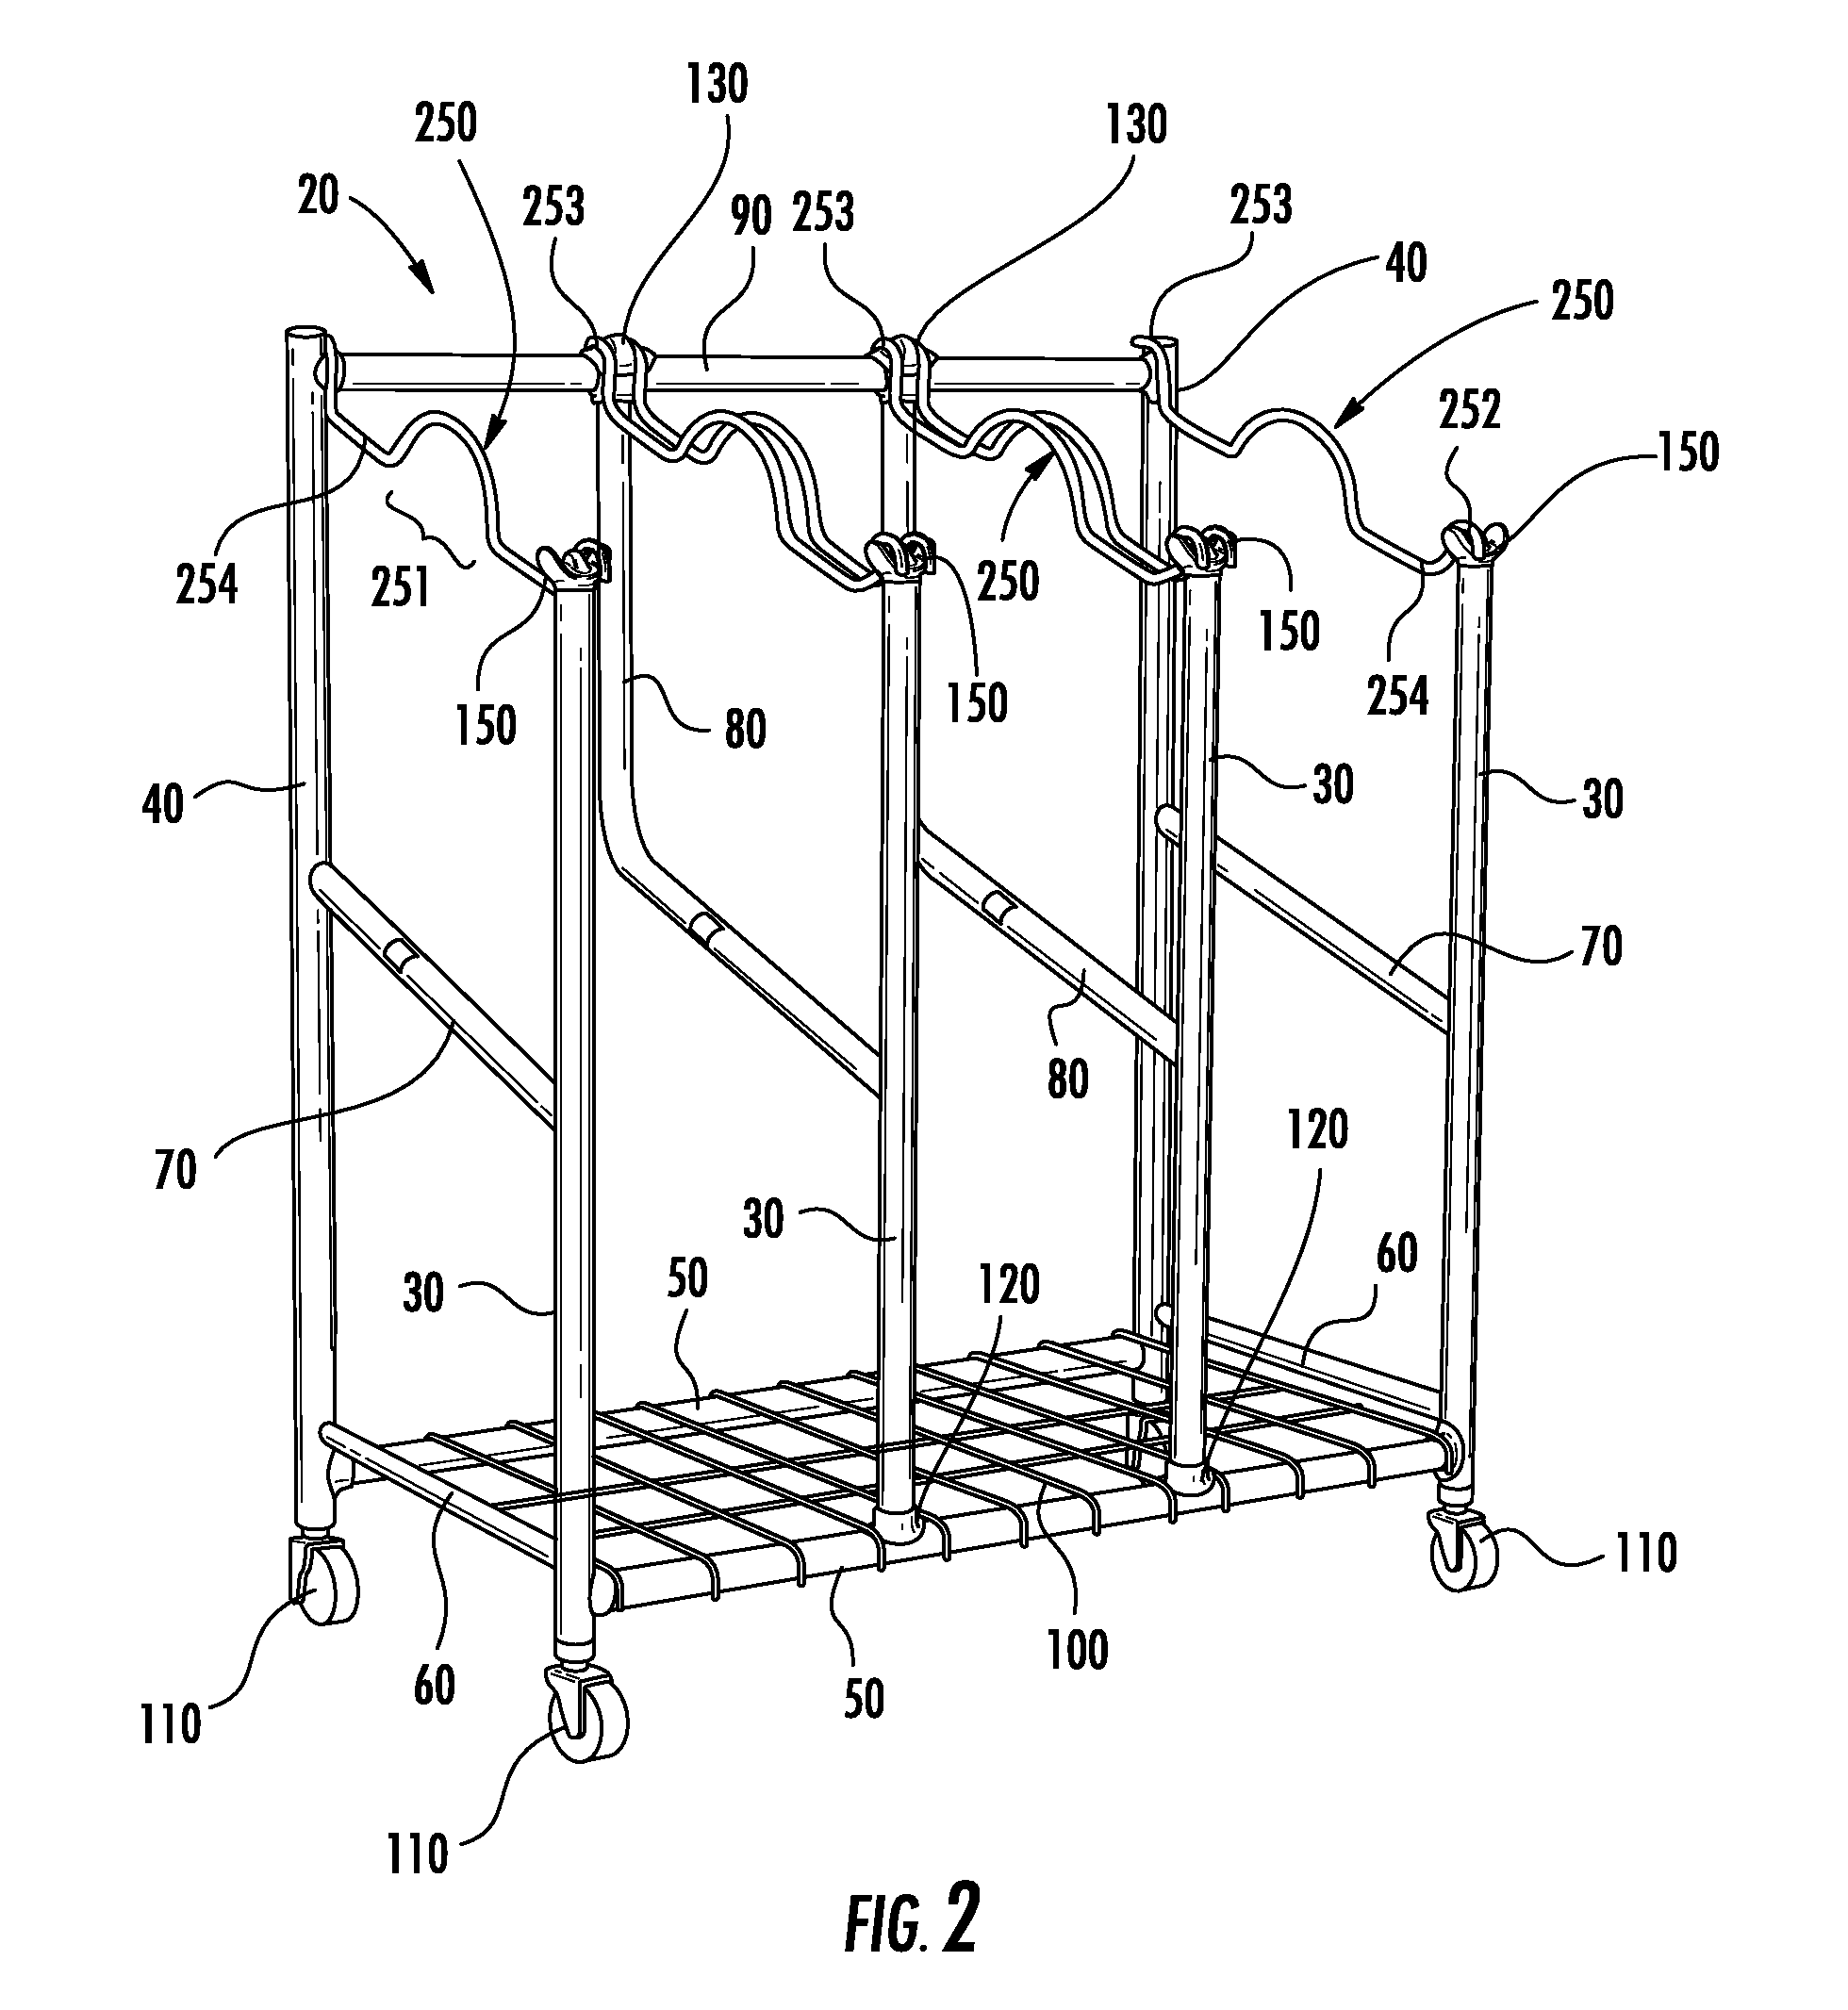 Laundry hampers and sorters with accessible front loading regions